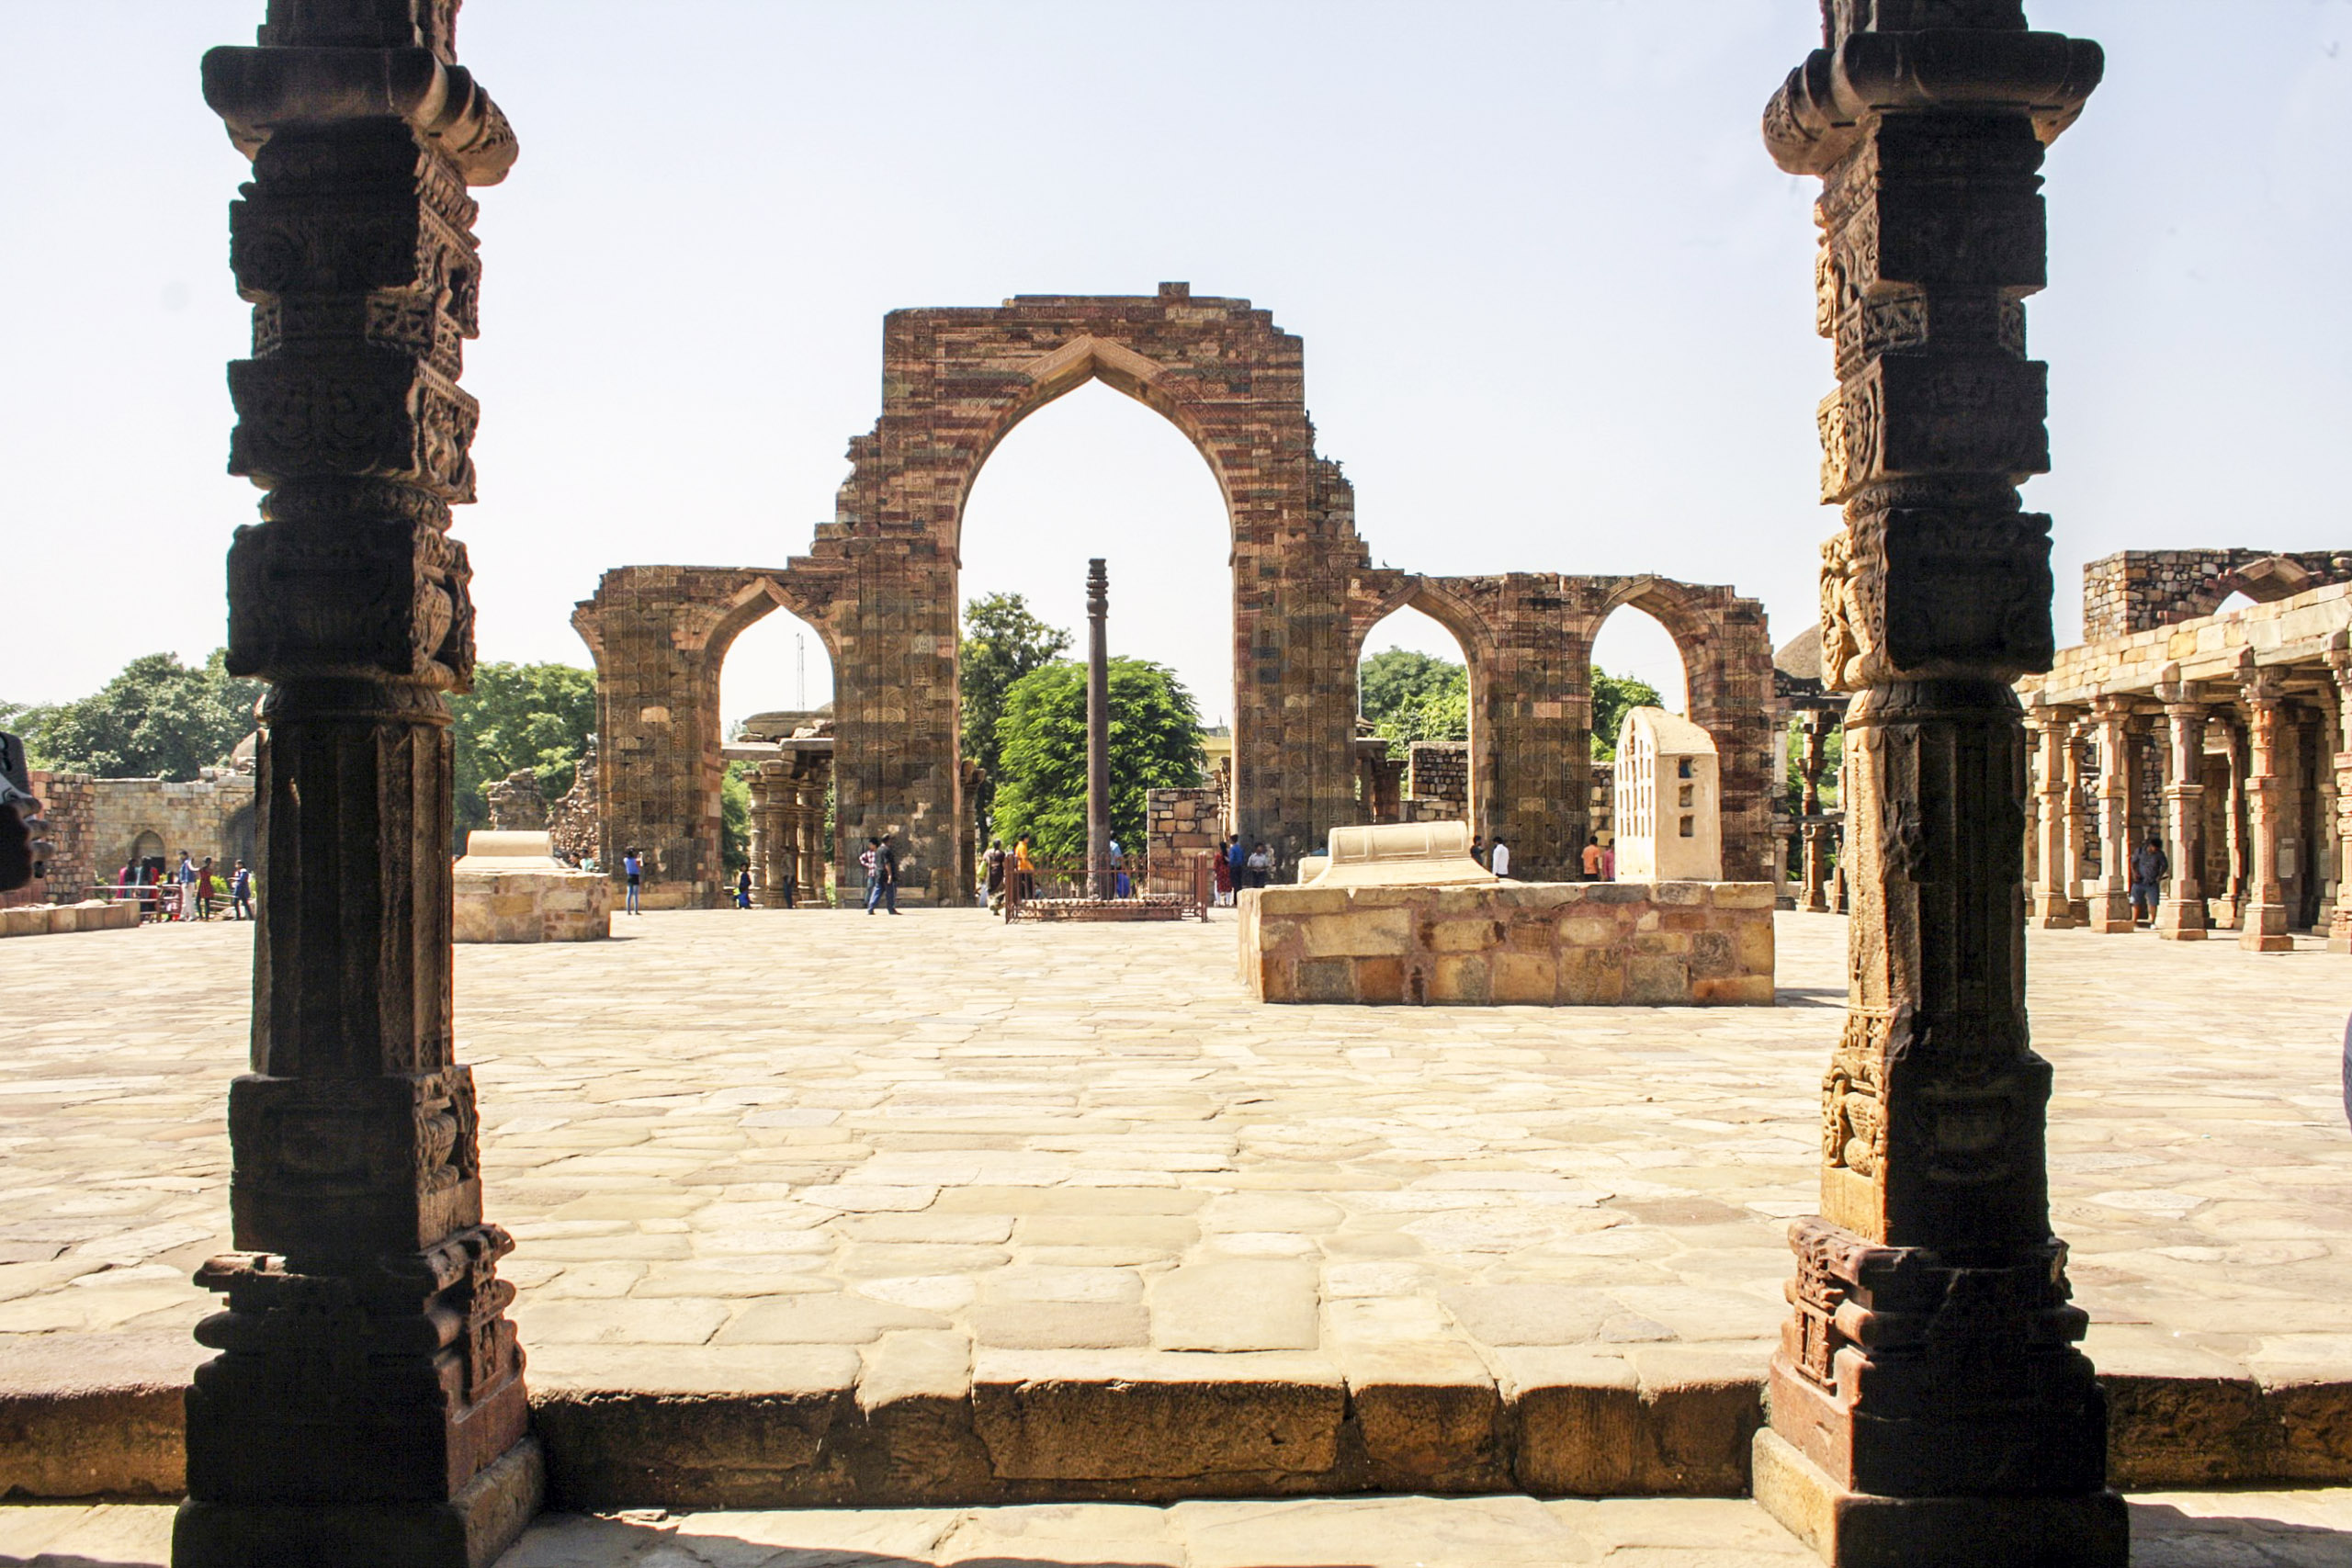 This photograph depicts the courtyard of the (now ruined) Quwwat-al-Islam mosque at the Qutb archaeological complex in Delhi, a site which epitomizes artistic syncretism. In the foreground of this photograph we see the pillars of a colonnaded walkway created by reusing stone blocks that were once in local Hindu and Jain temples. In the distant background in the center is a c. 4th–5th century iron pillar. Like the stones of the colonnaded walkway, the iron pillar was also taken from an existing Hindu temple. By contrast, the arched screen and prayer hall that appear in the distance of the photograph illustrate the new architectural style of true arches introduced by the Muslim patrons who created this mosque. The courtyard of the Quwwat-al-Islam mosque, c. 1192, Qutb archaeological complex, Delhi (photo: Indrajit Das, CC BY-SA 4.0)